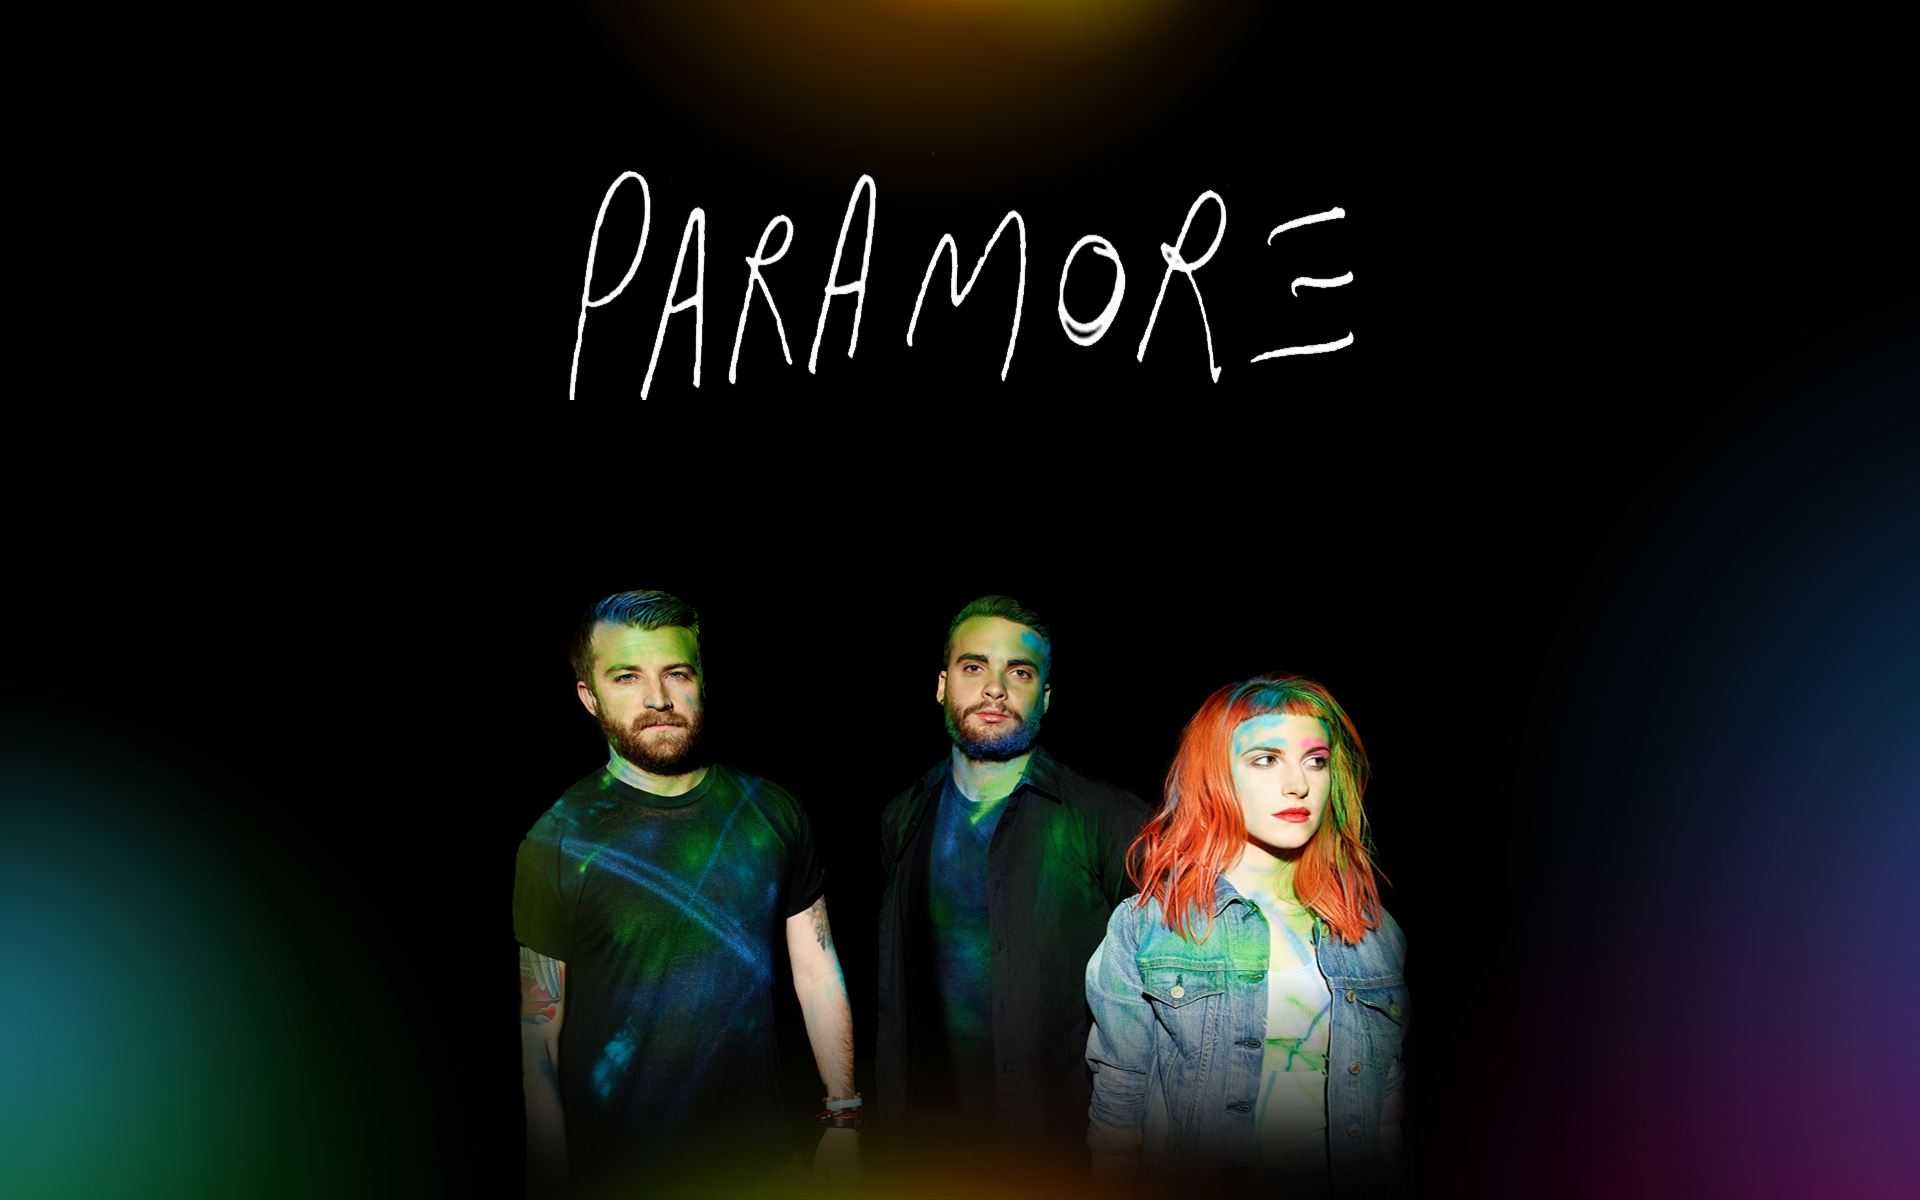 Paramore Wallpaper Image Amp Pictures Becuo